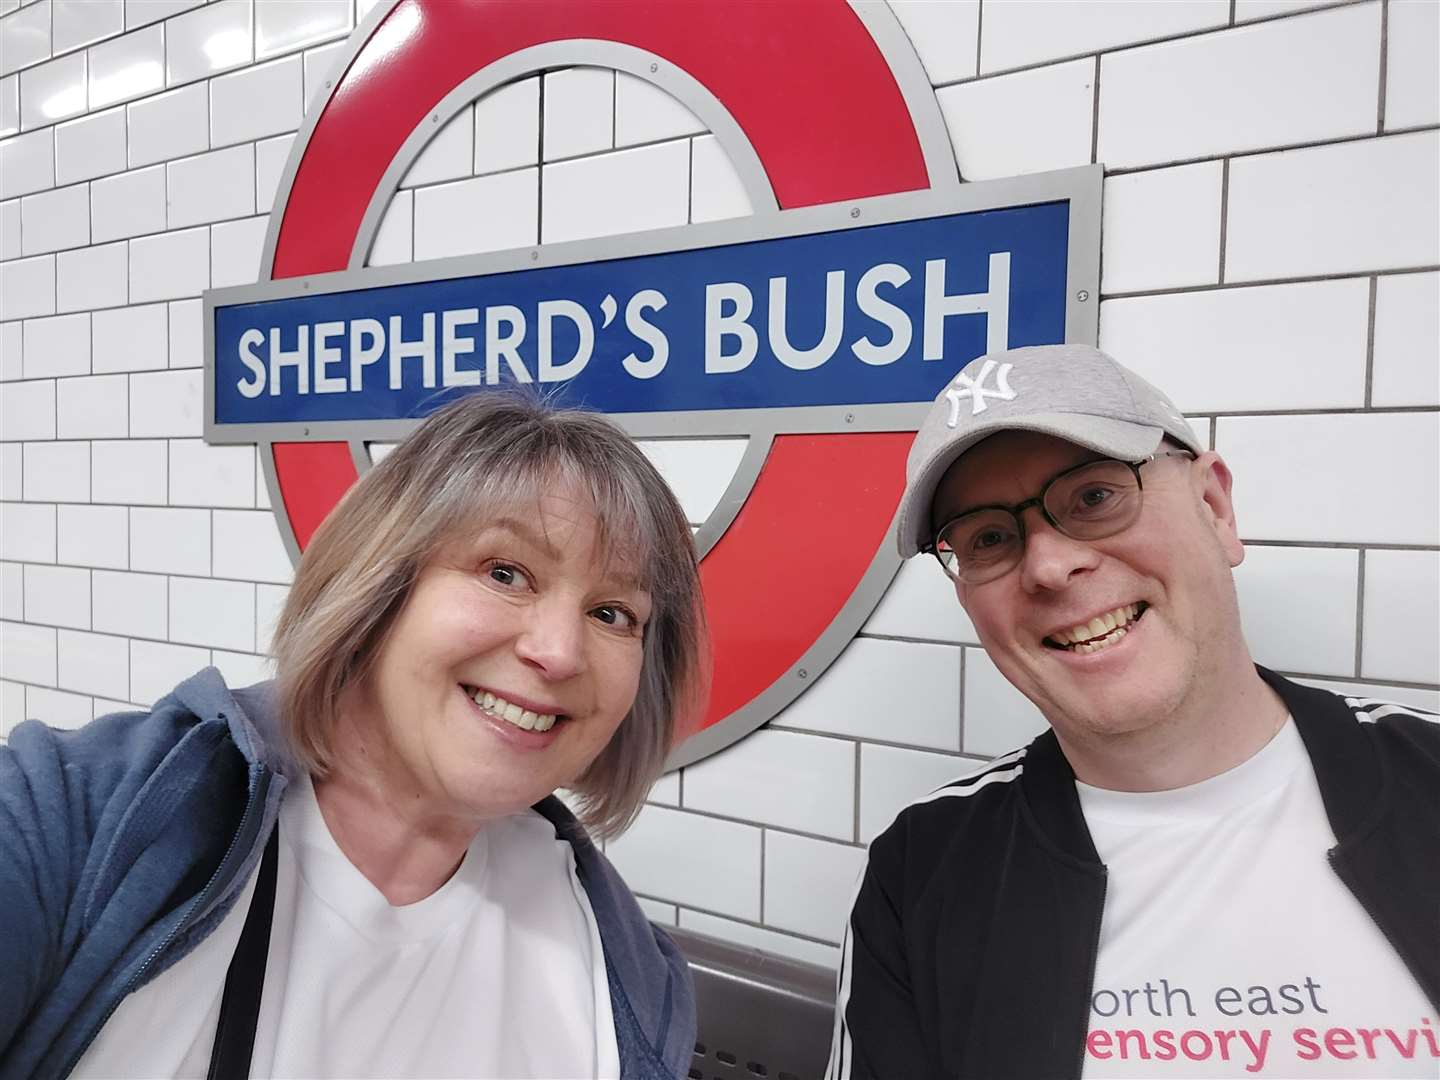 It took Garry and Tracey 24 hours to visit all 272 London Underground stops.